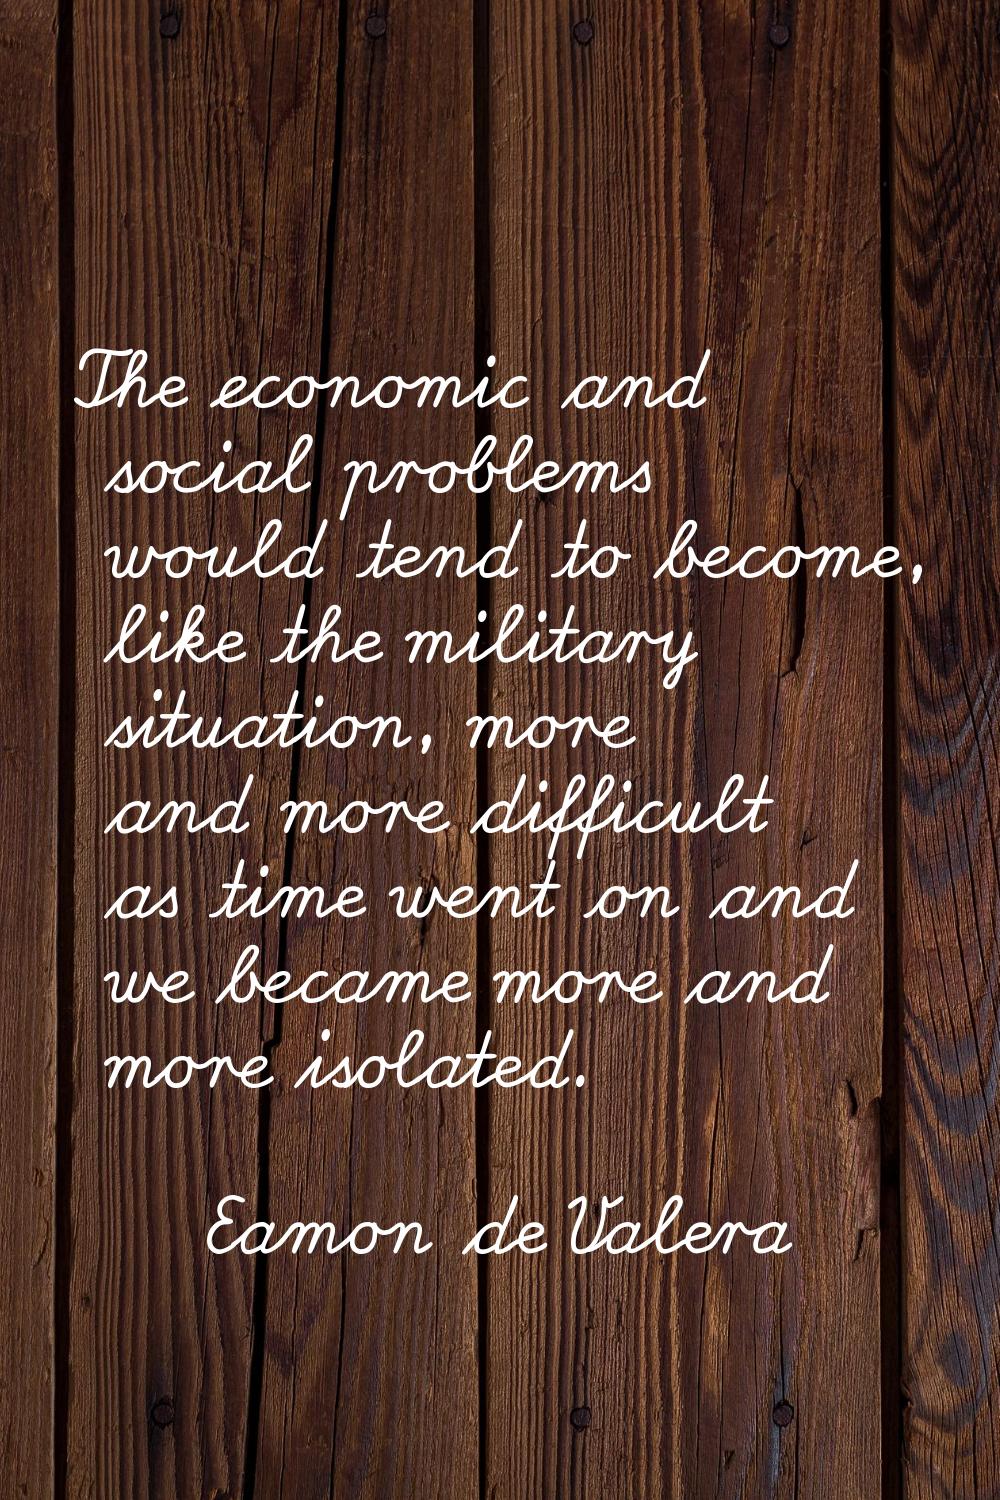 The economic and social problems would tend to become, like the military situation, more and more d